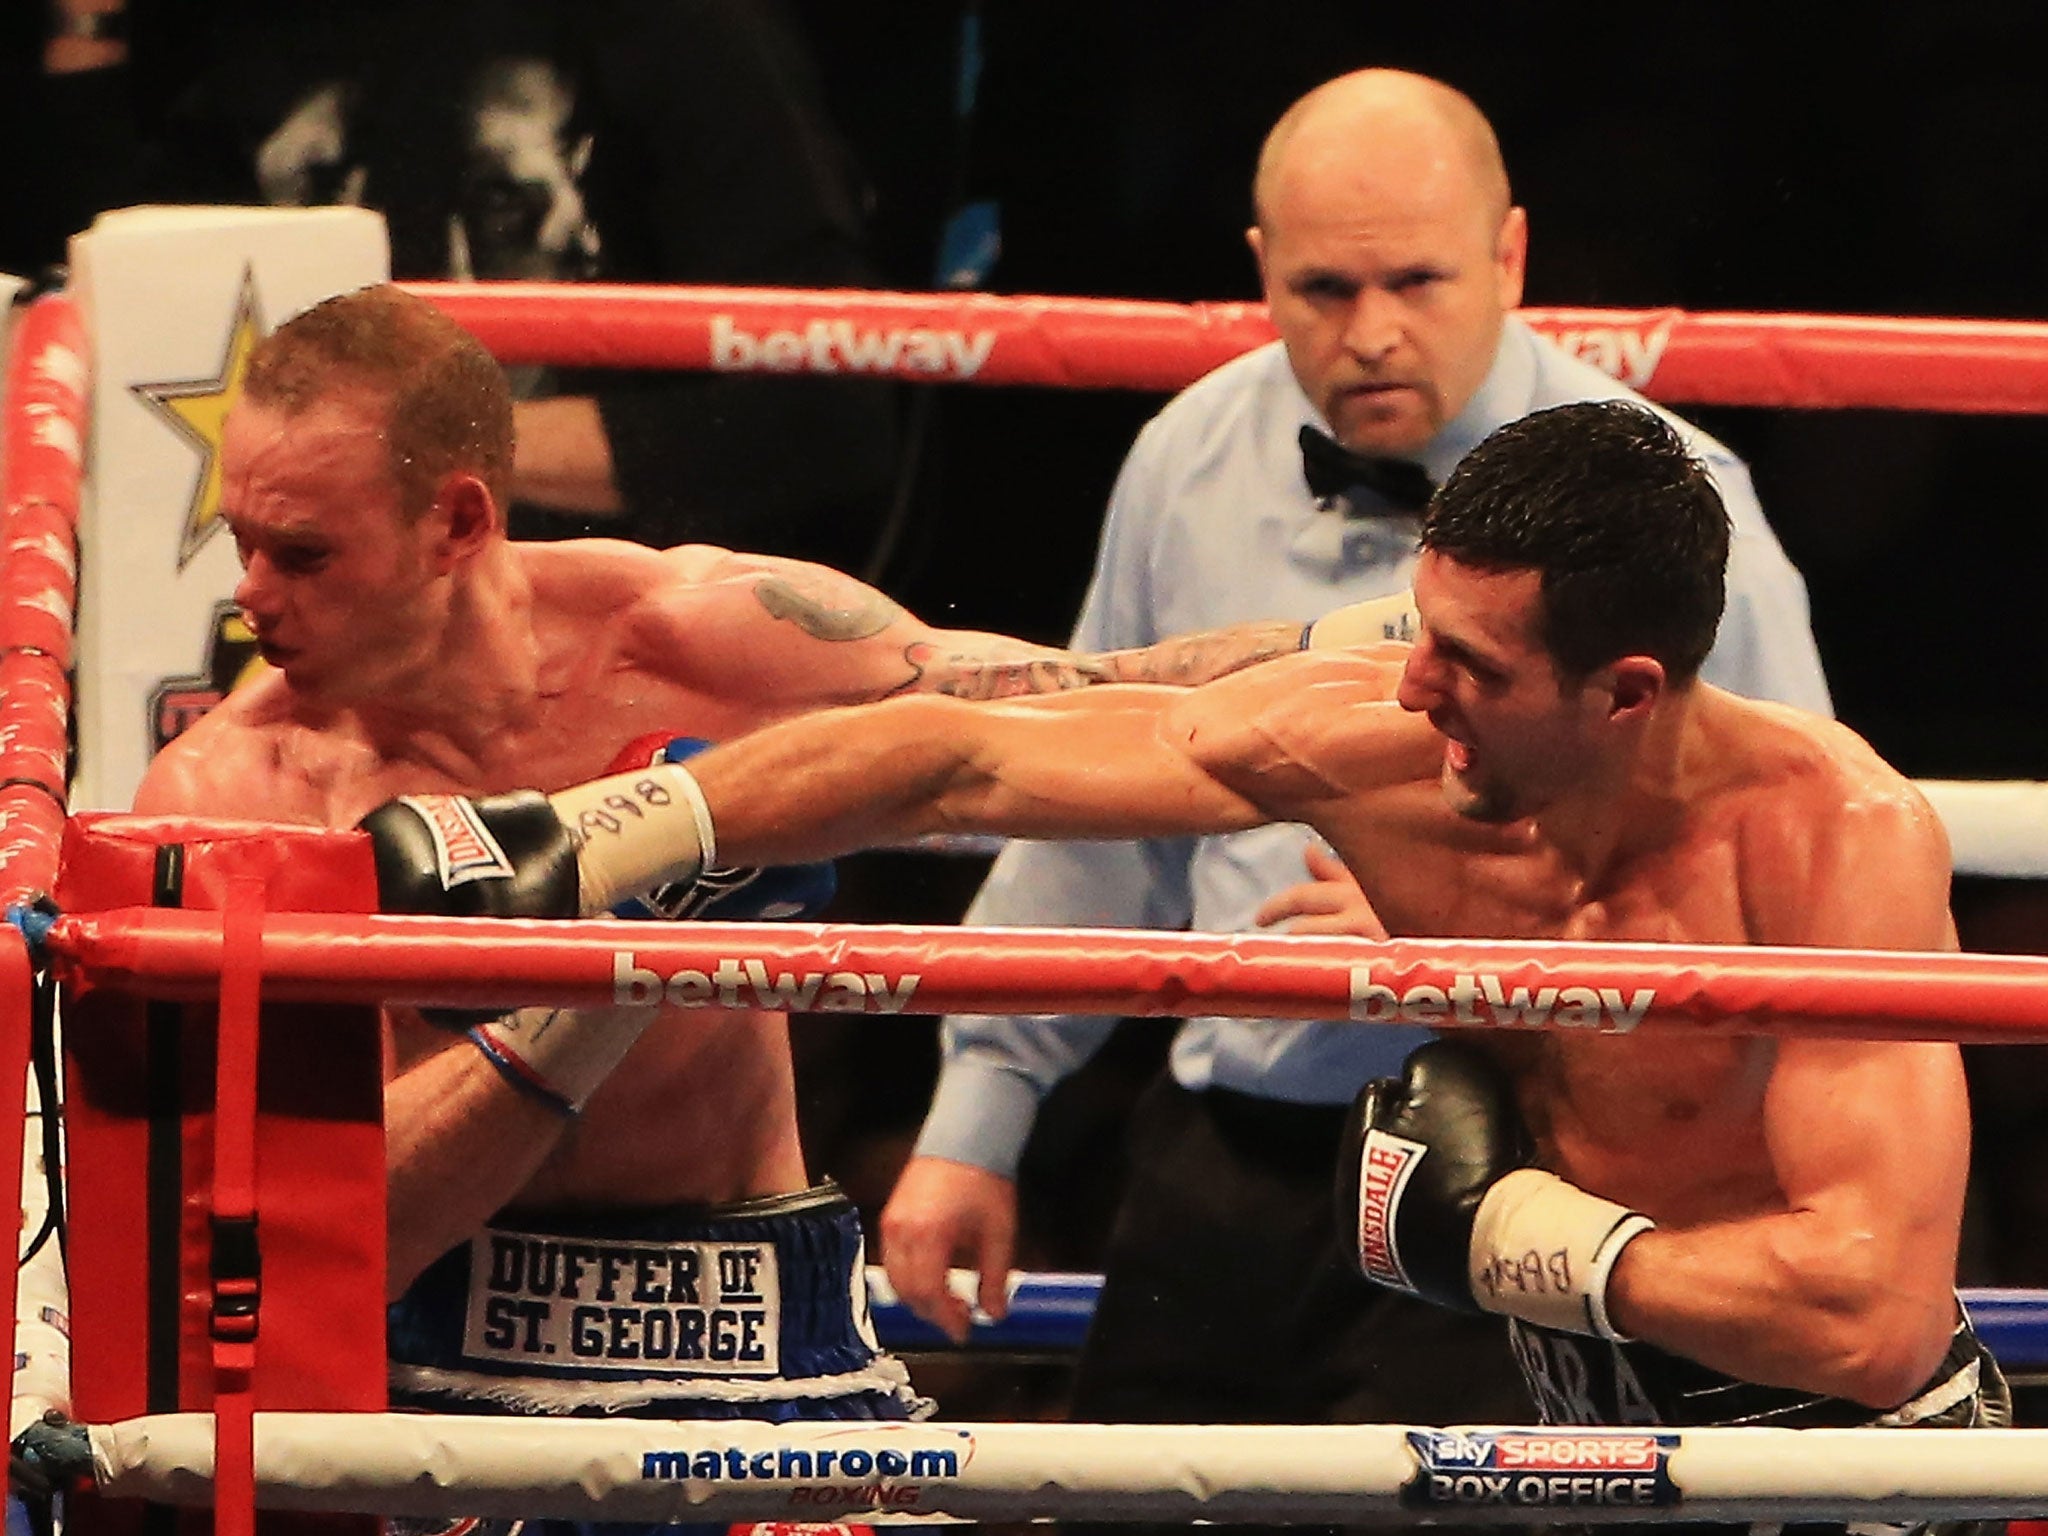 Carl Froch knocks out George Groves during the IBF & WBA World Super Middleweight Title Fight at Wembley